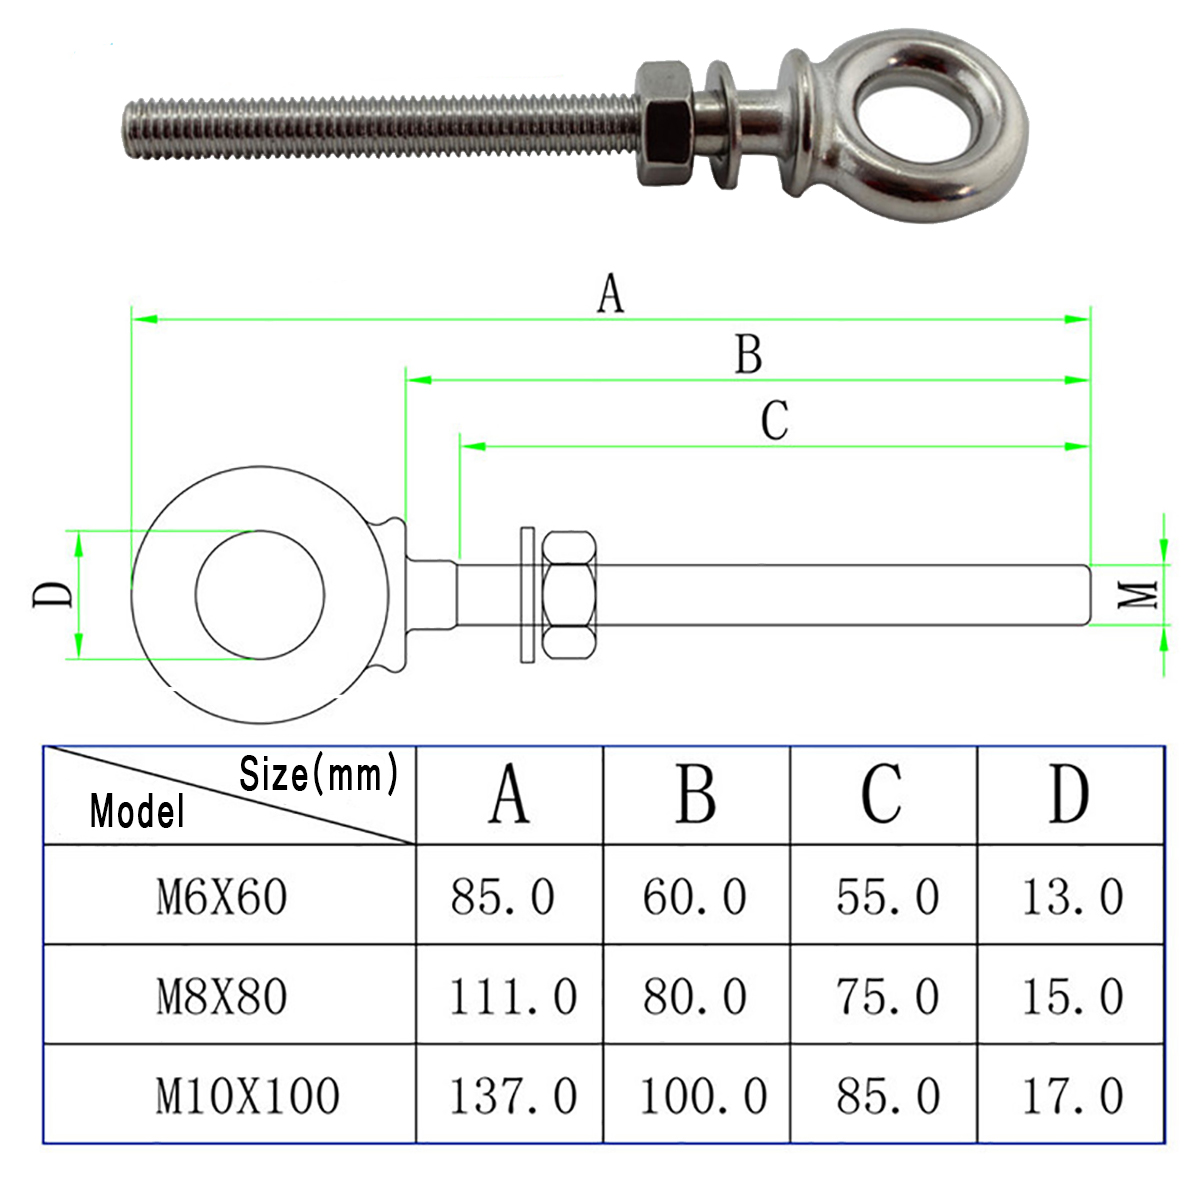 Stainless-Steel-Marine-Grade-Lifting-Eye-Bolts-Long-Shank-Nut-amp-Washer-M8x80mm-1533395